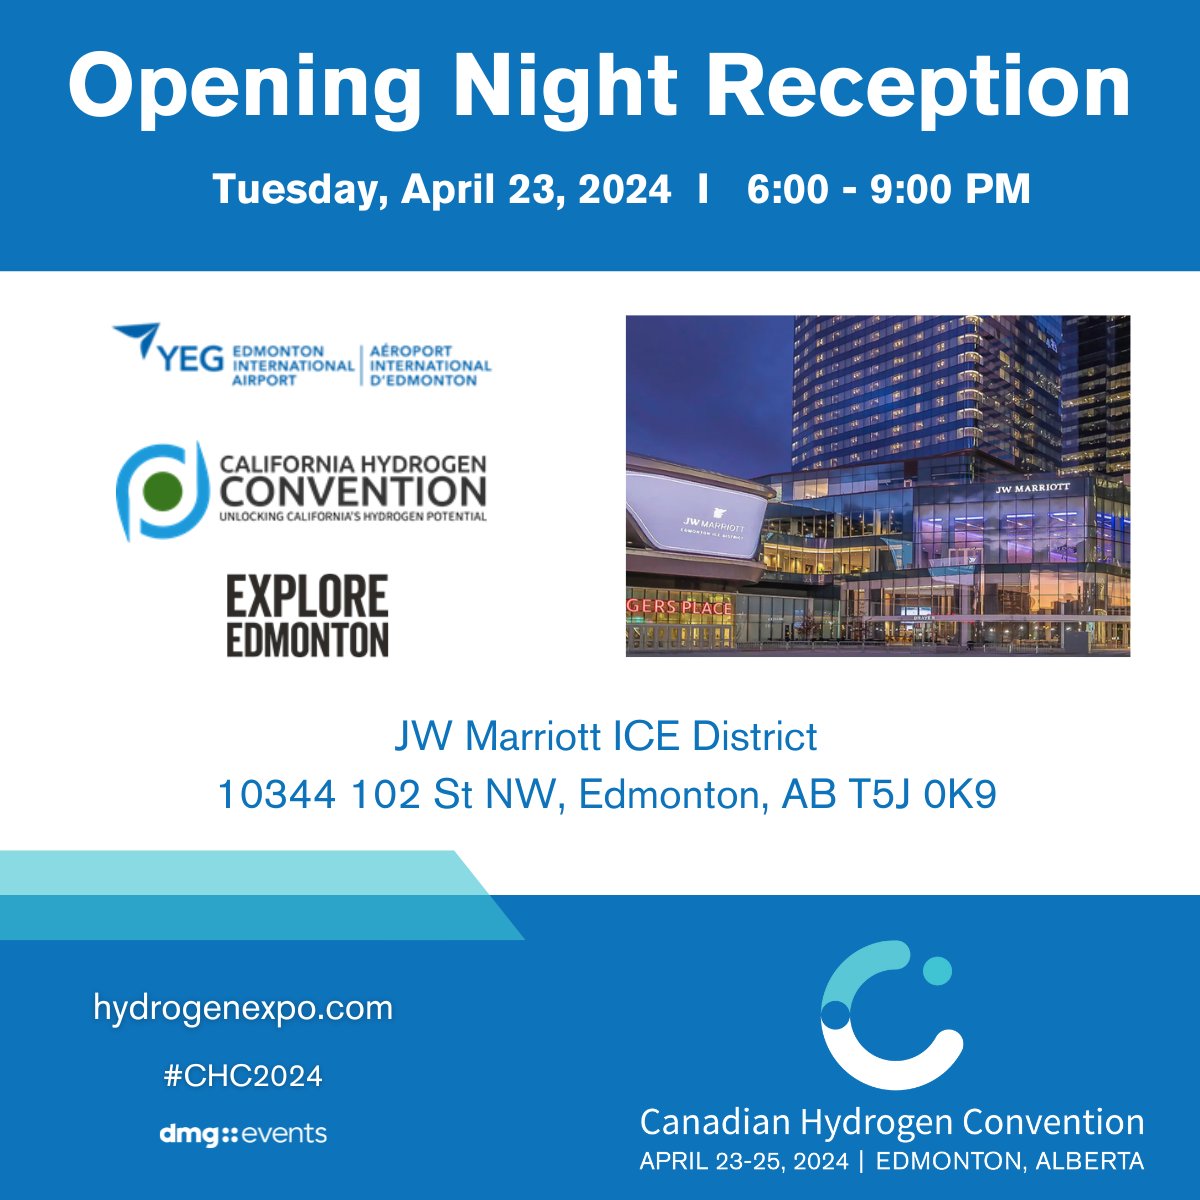 Don't miss the #CHC2024 Opening Night Reception, on April 23 hosted by @FlyYEG, California Hydrogen Convention, & @ExploreEdmonton at the JW Marriott ICE District. Included in your strategic and technical delegate pass. Learn more: ow.ly/e3Gu50Rkh3u